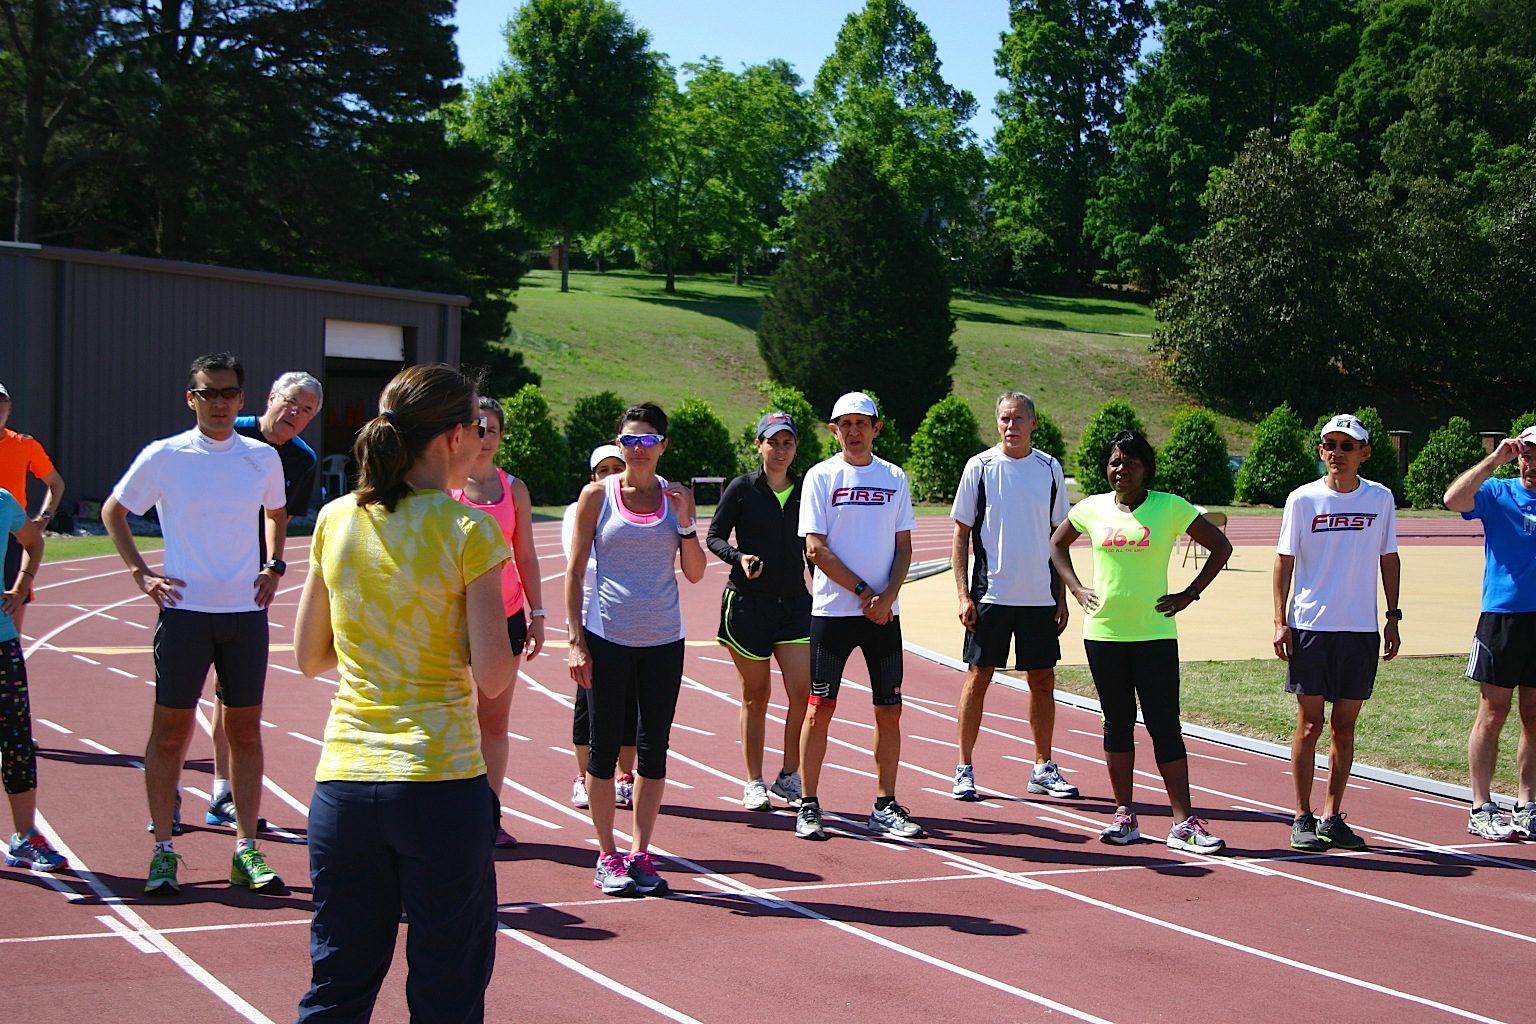 Athletes about to start running around the track